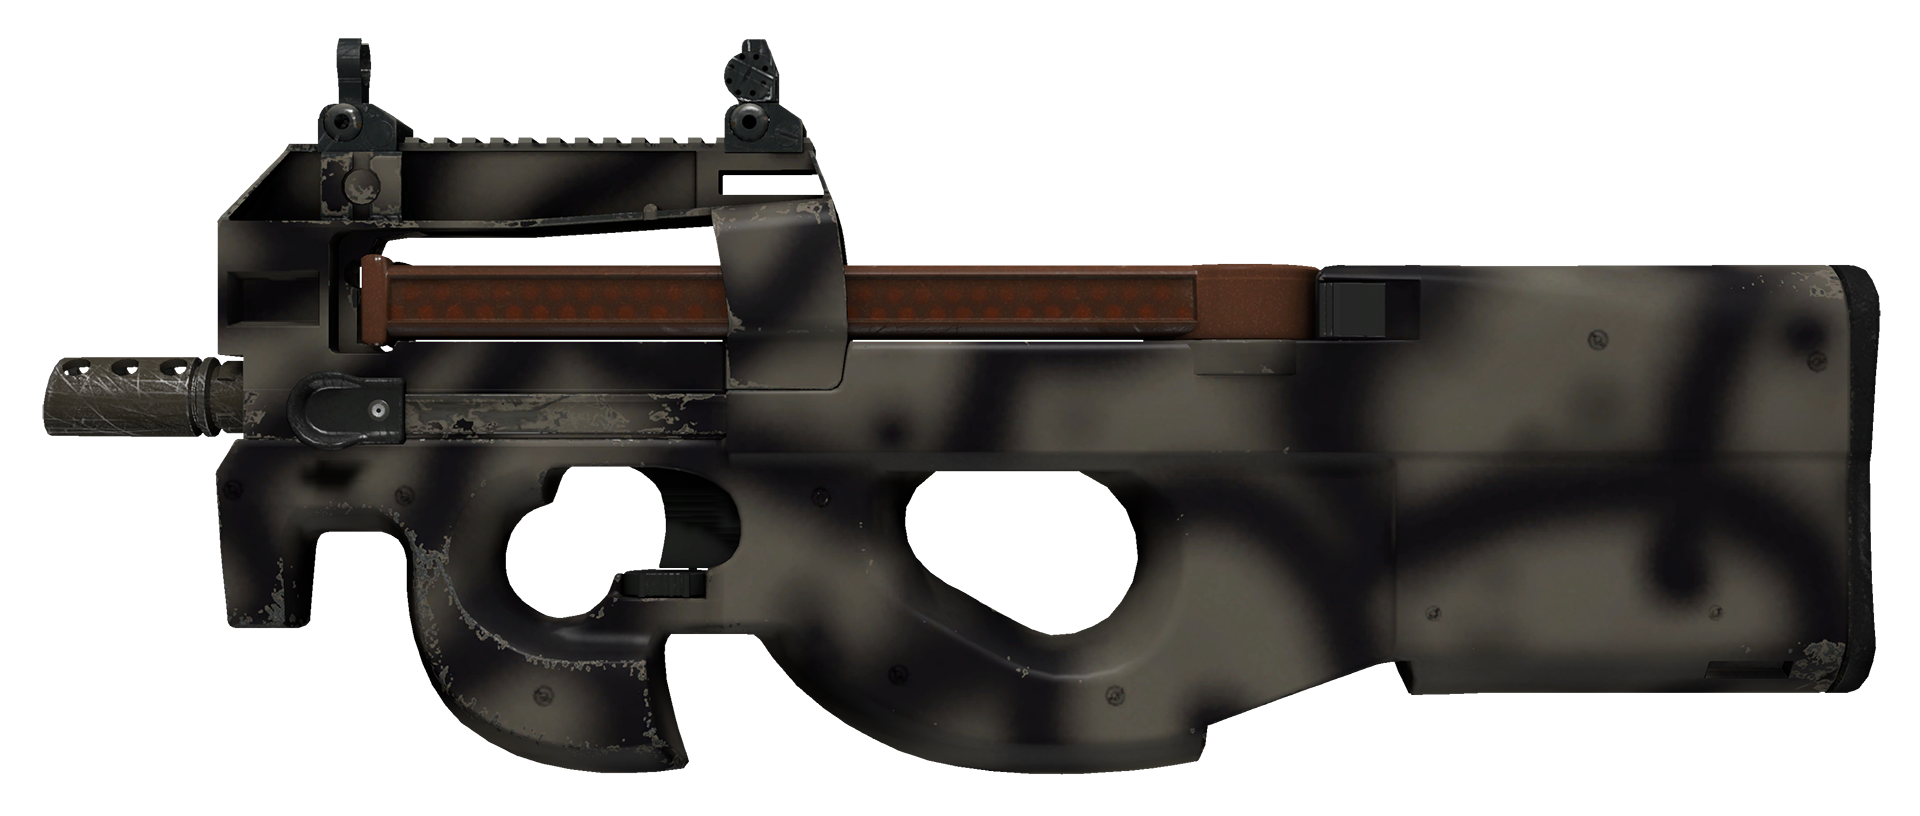 P90 Scorched Large Rendering